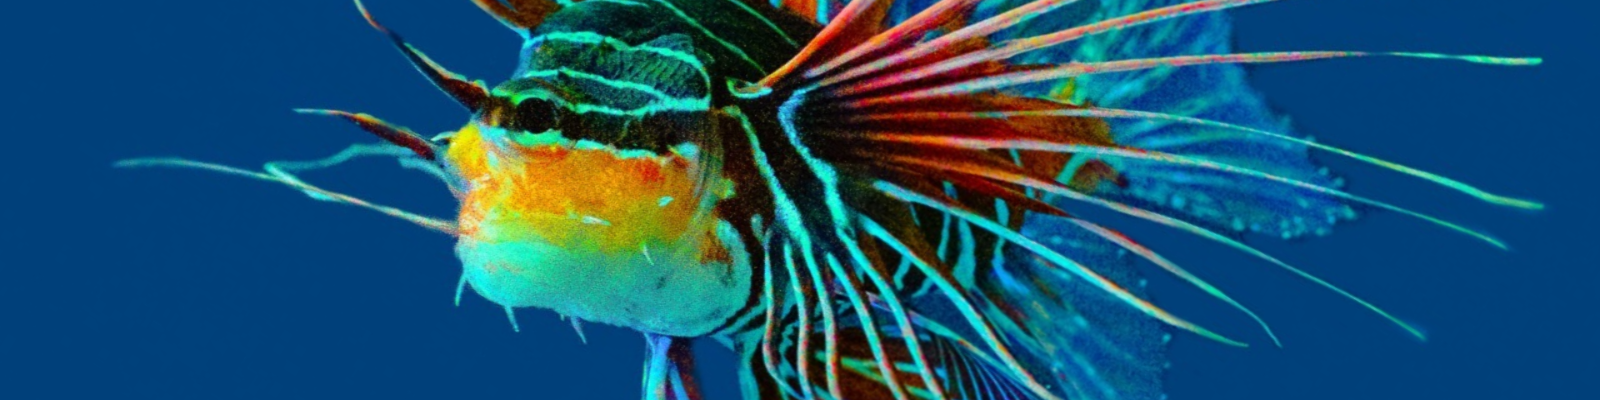 Colorful Lionfish swimming in water